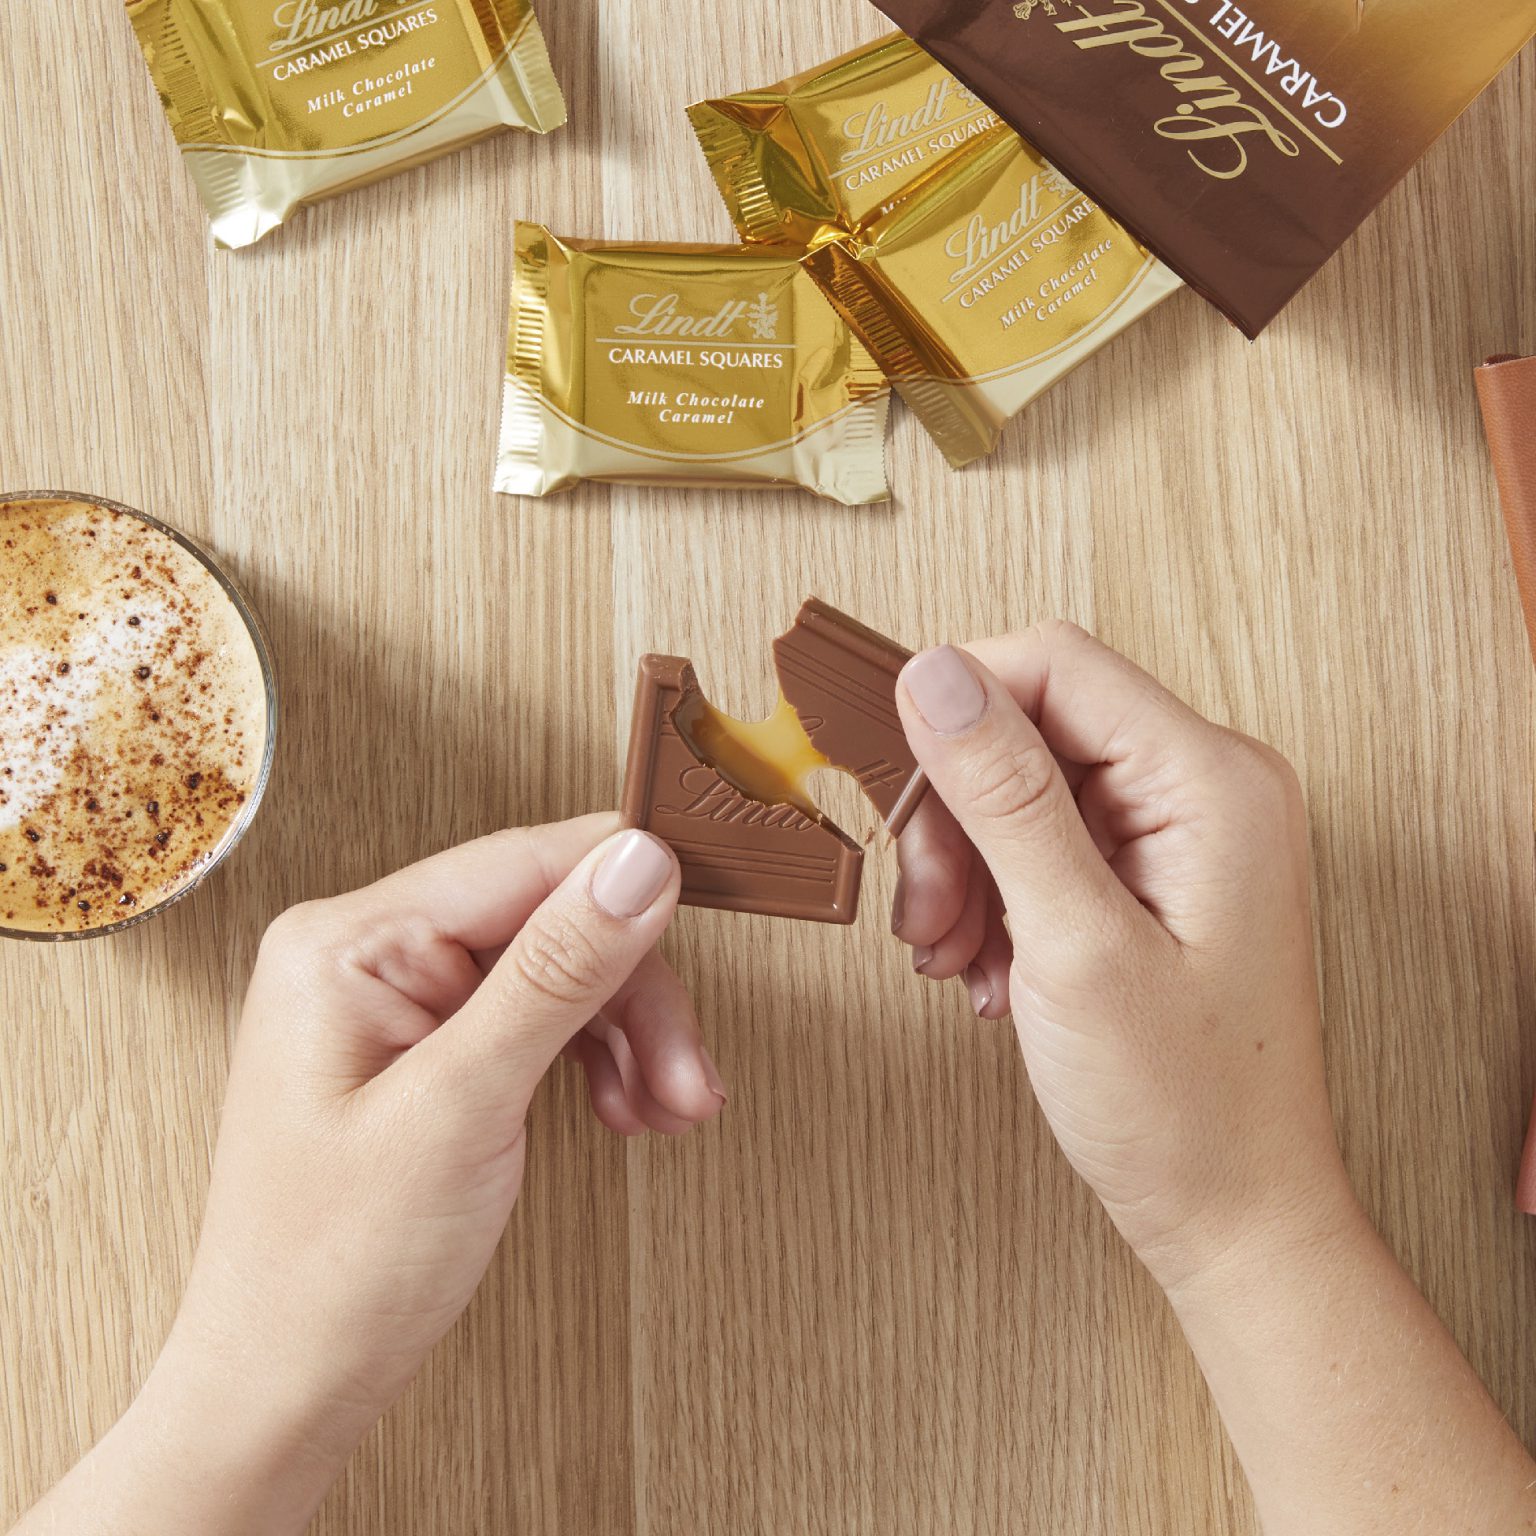 Lindt Master Chocolatier Shares What To Pair With New Lindt Chocolates 8871